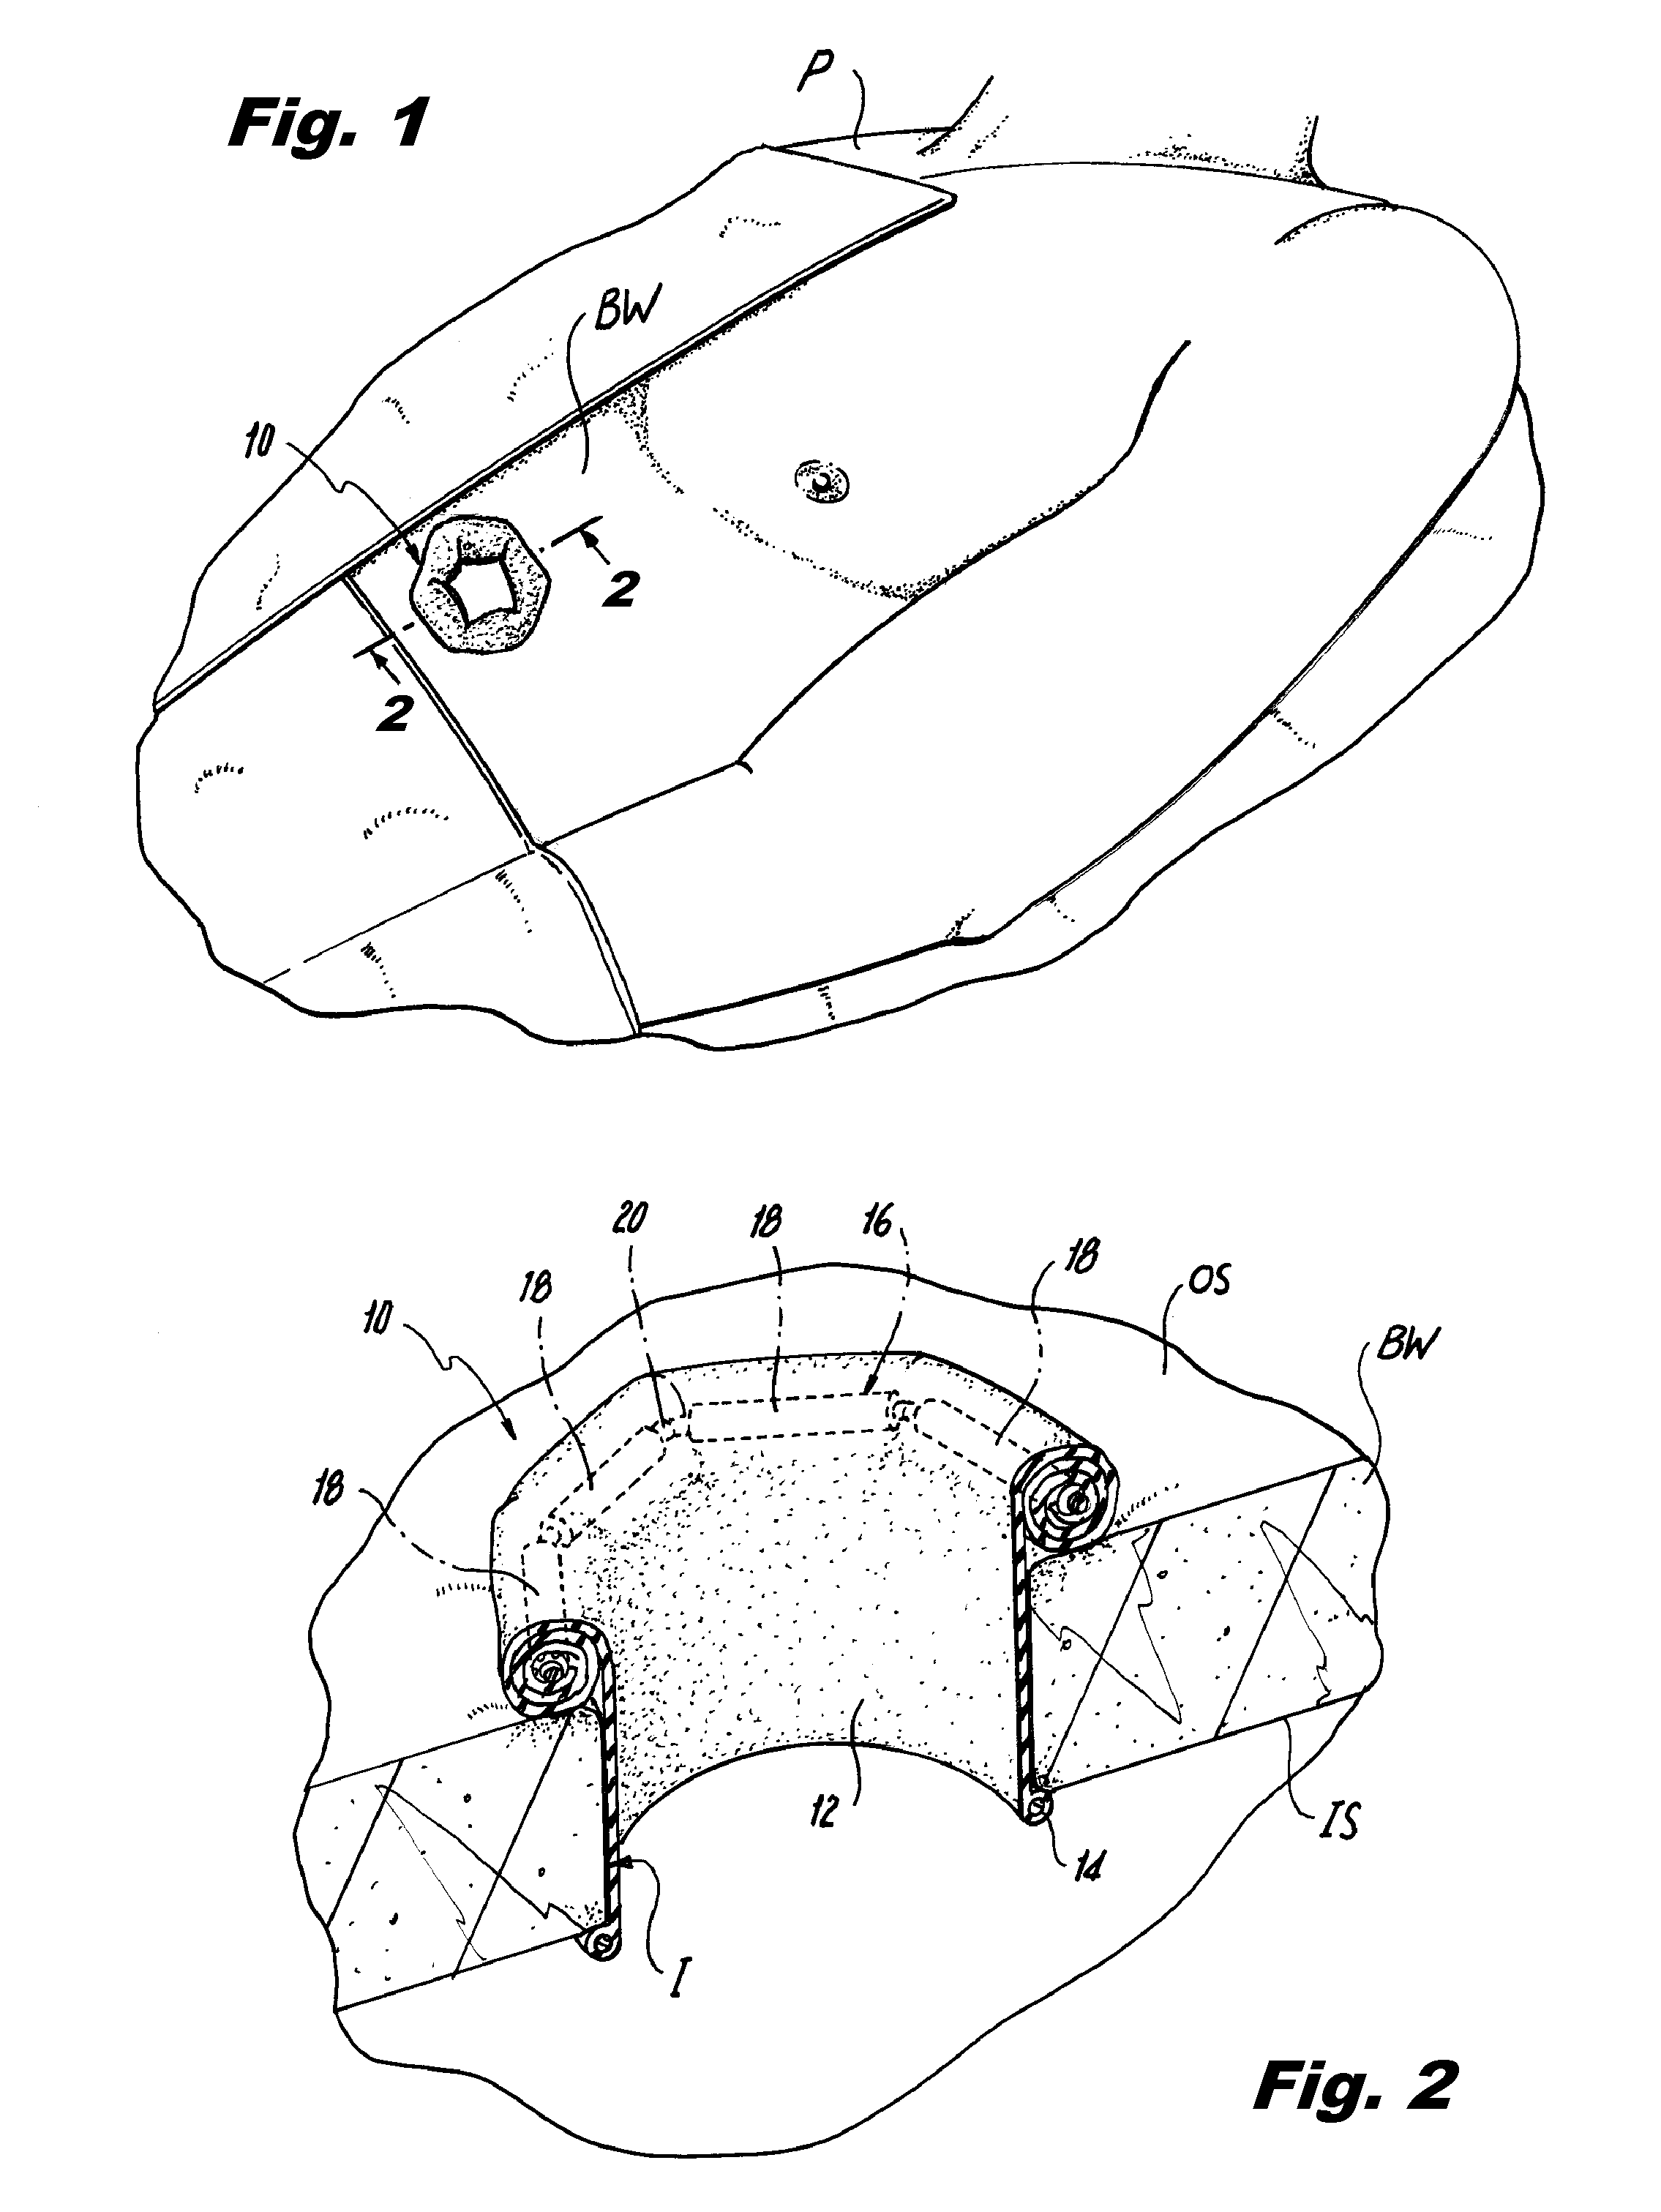 Surgical retractor including polygonal rolling structure